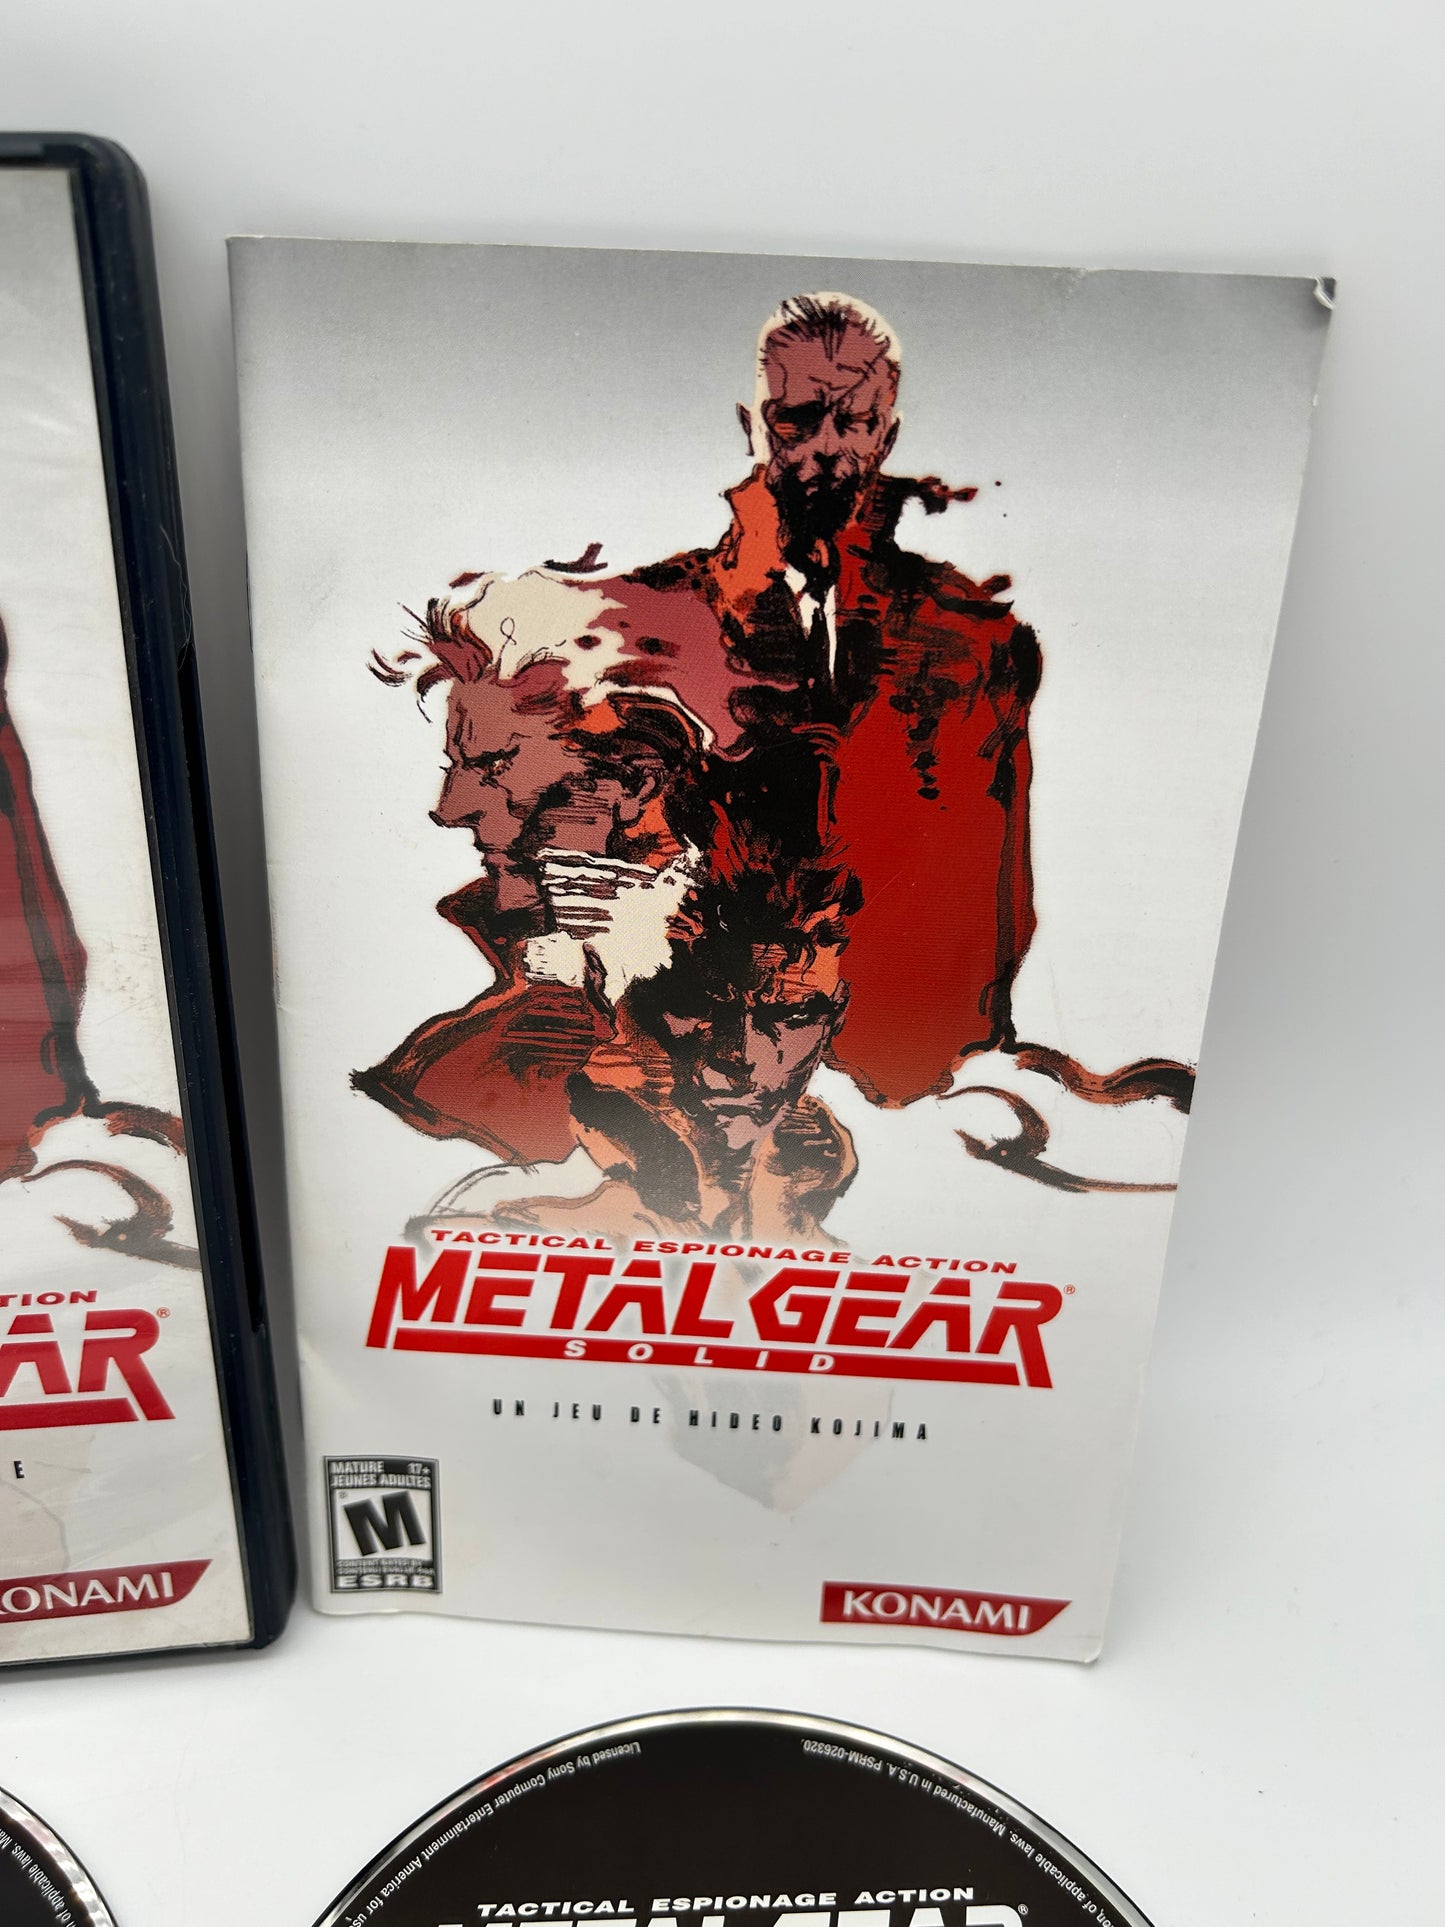 SONY PLAYSTATiON [PS1] | METAL GEAR SOLiD | LONG BOX VERSiON